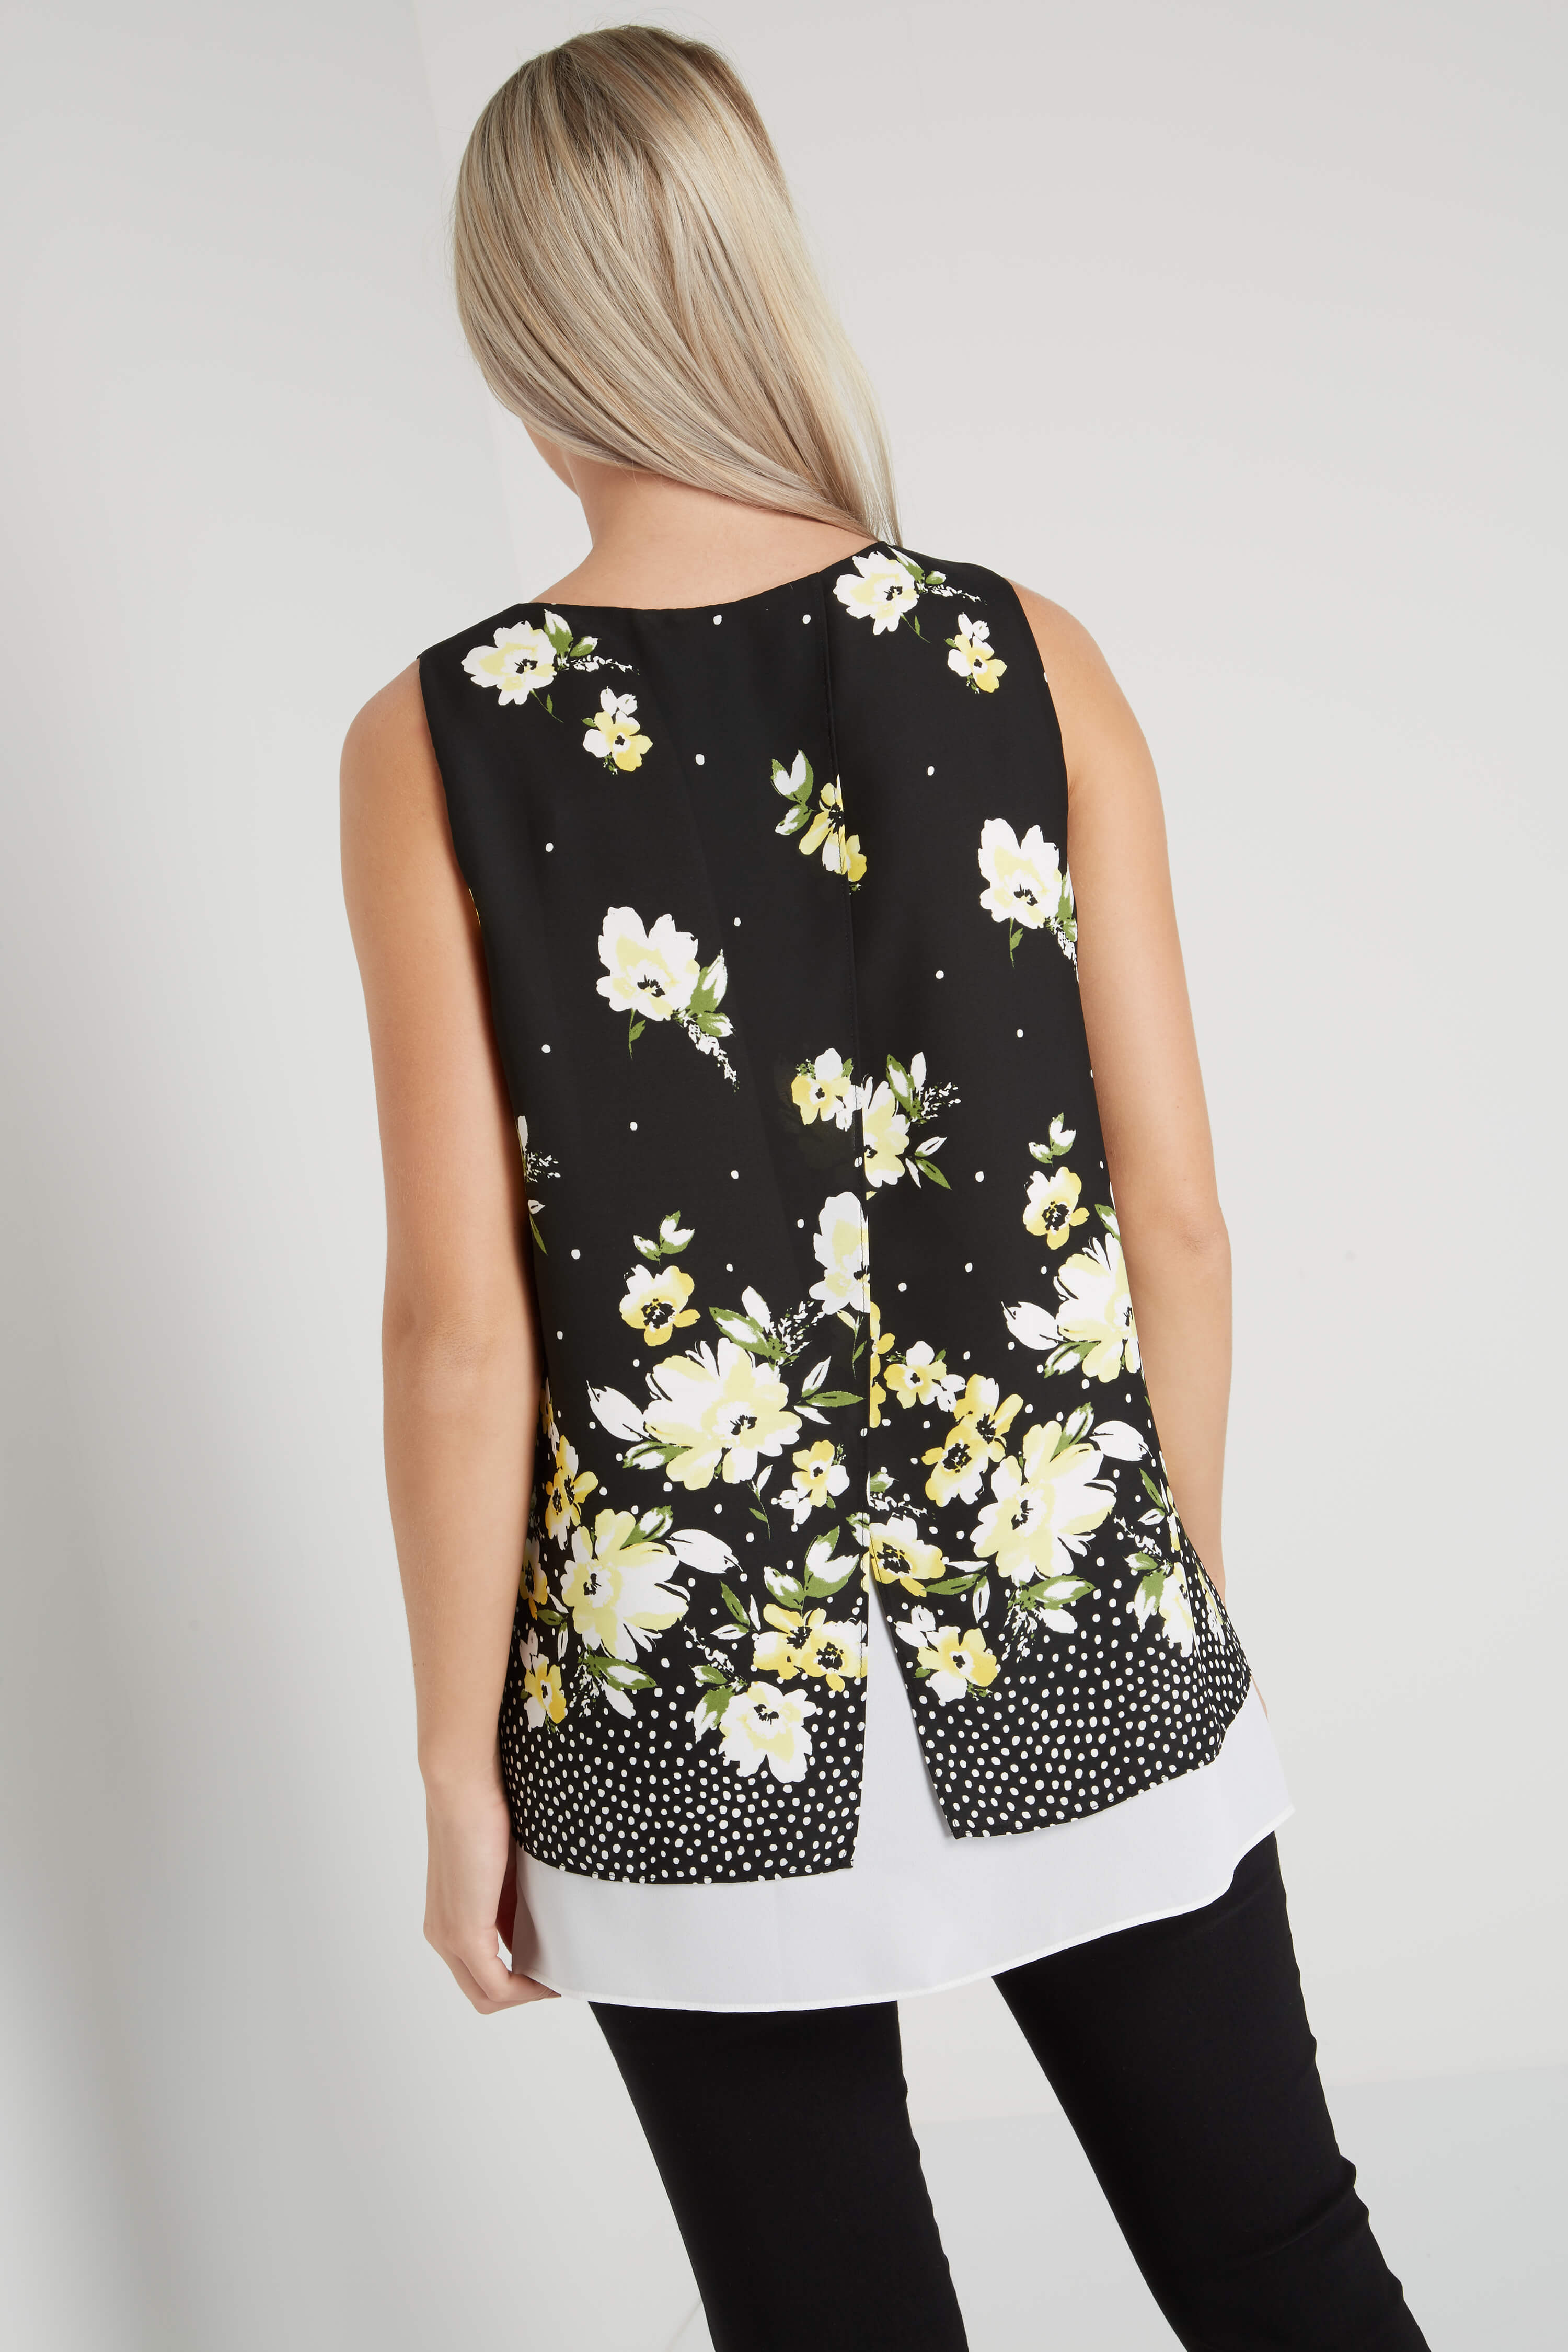 Black Floral Print Overlay Top, Image 3 of 5